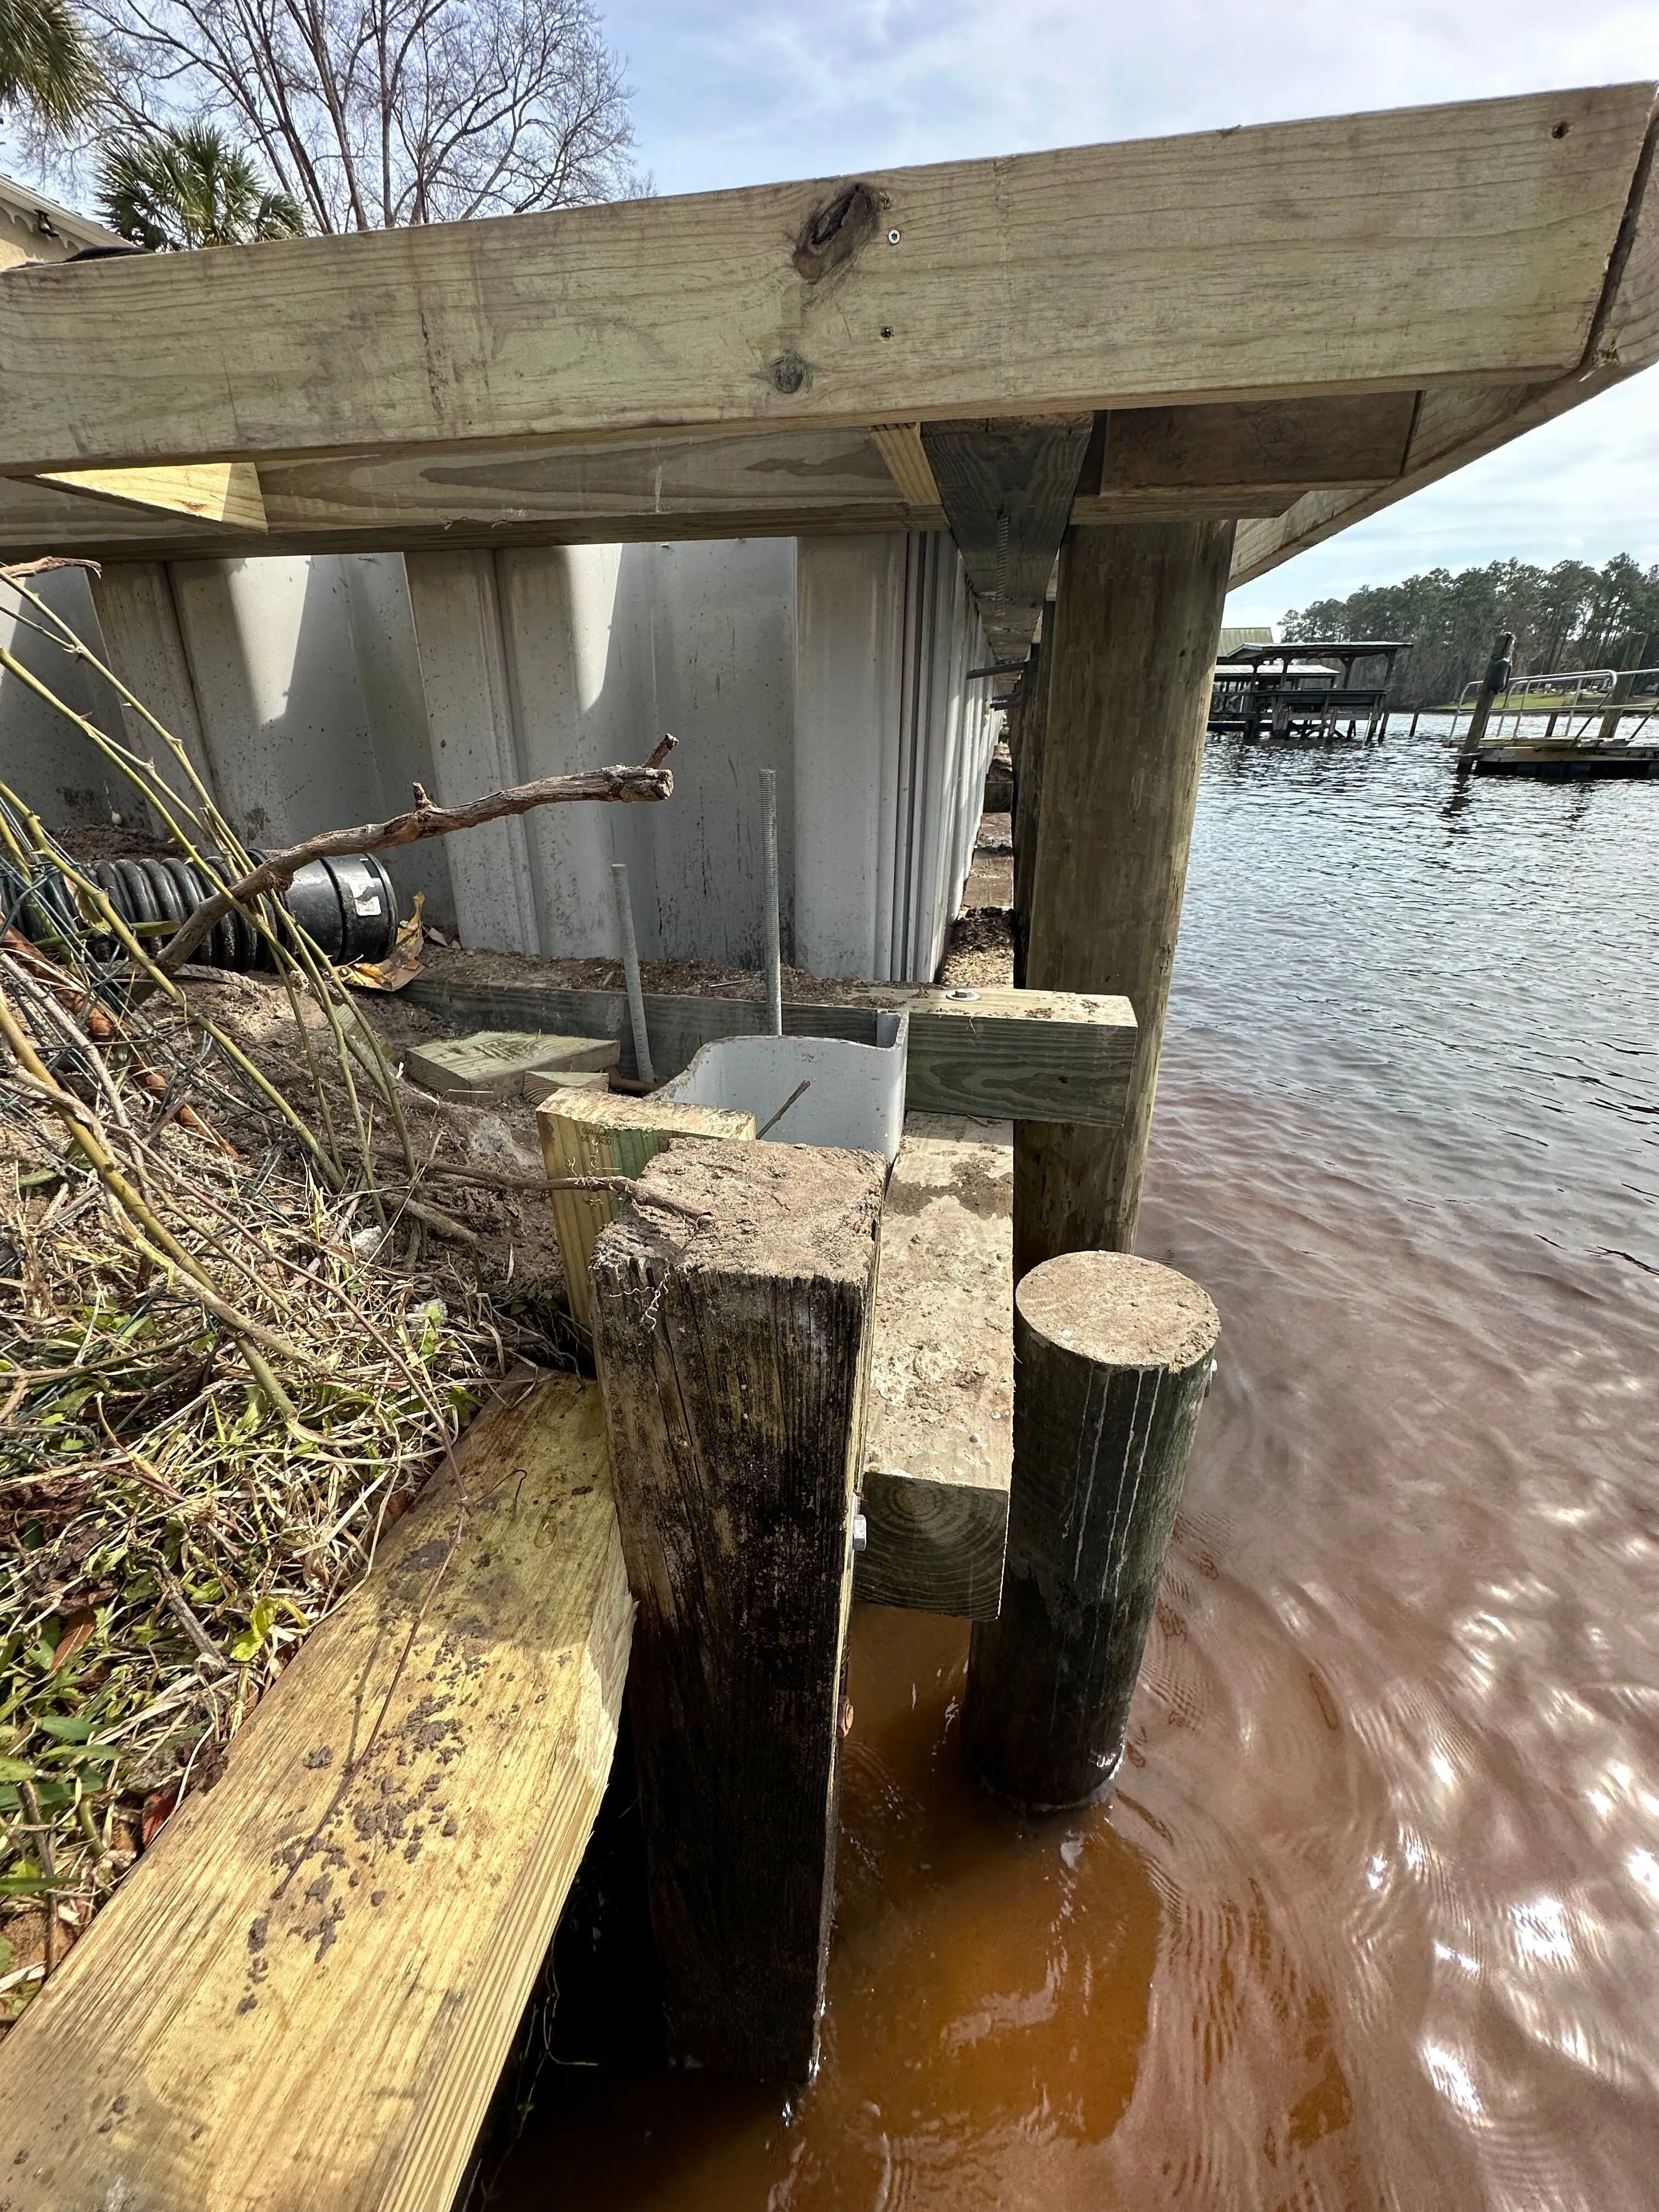 Super Strong Vinyl Bulkhead framed out for composite wood cap under construction in Myrtle Beach SC on the Intracoastal Waterway built by Waterbridge Contractors of the Carolinas